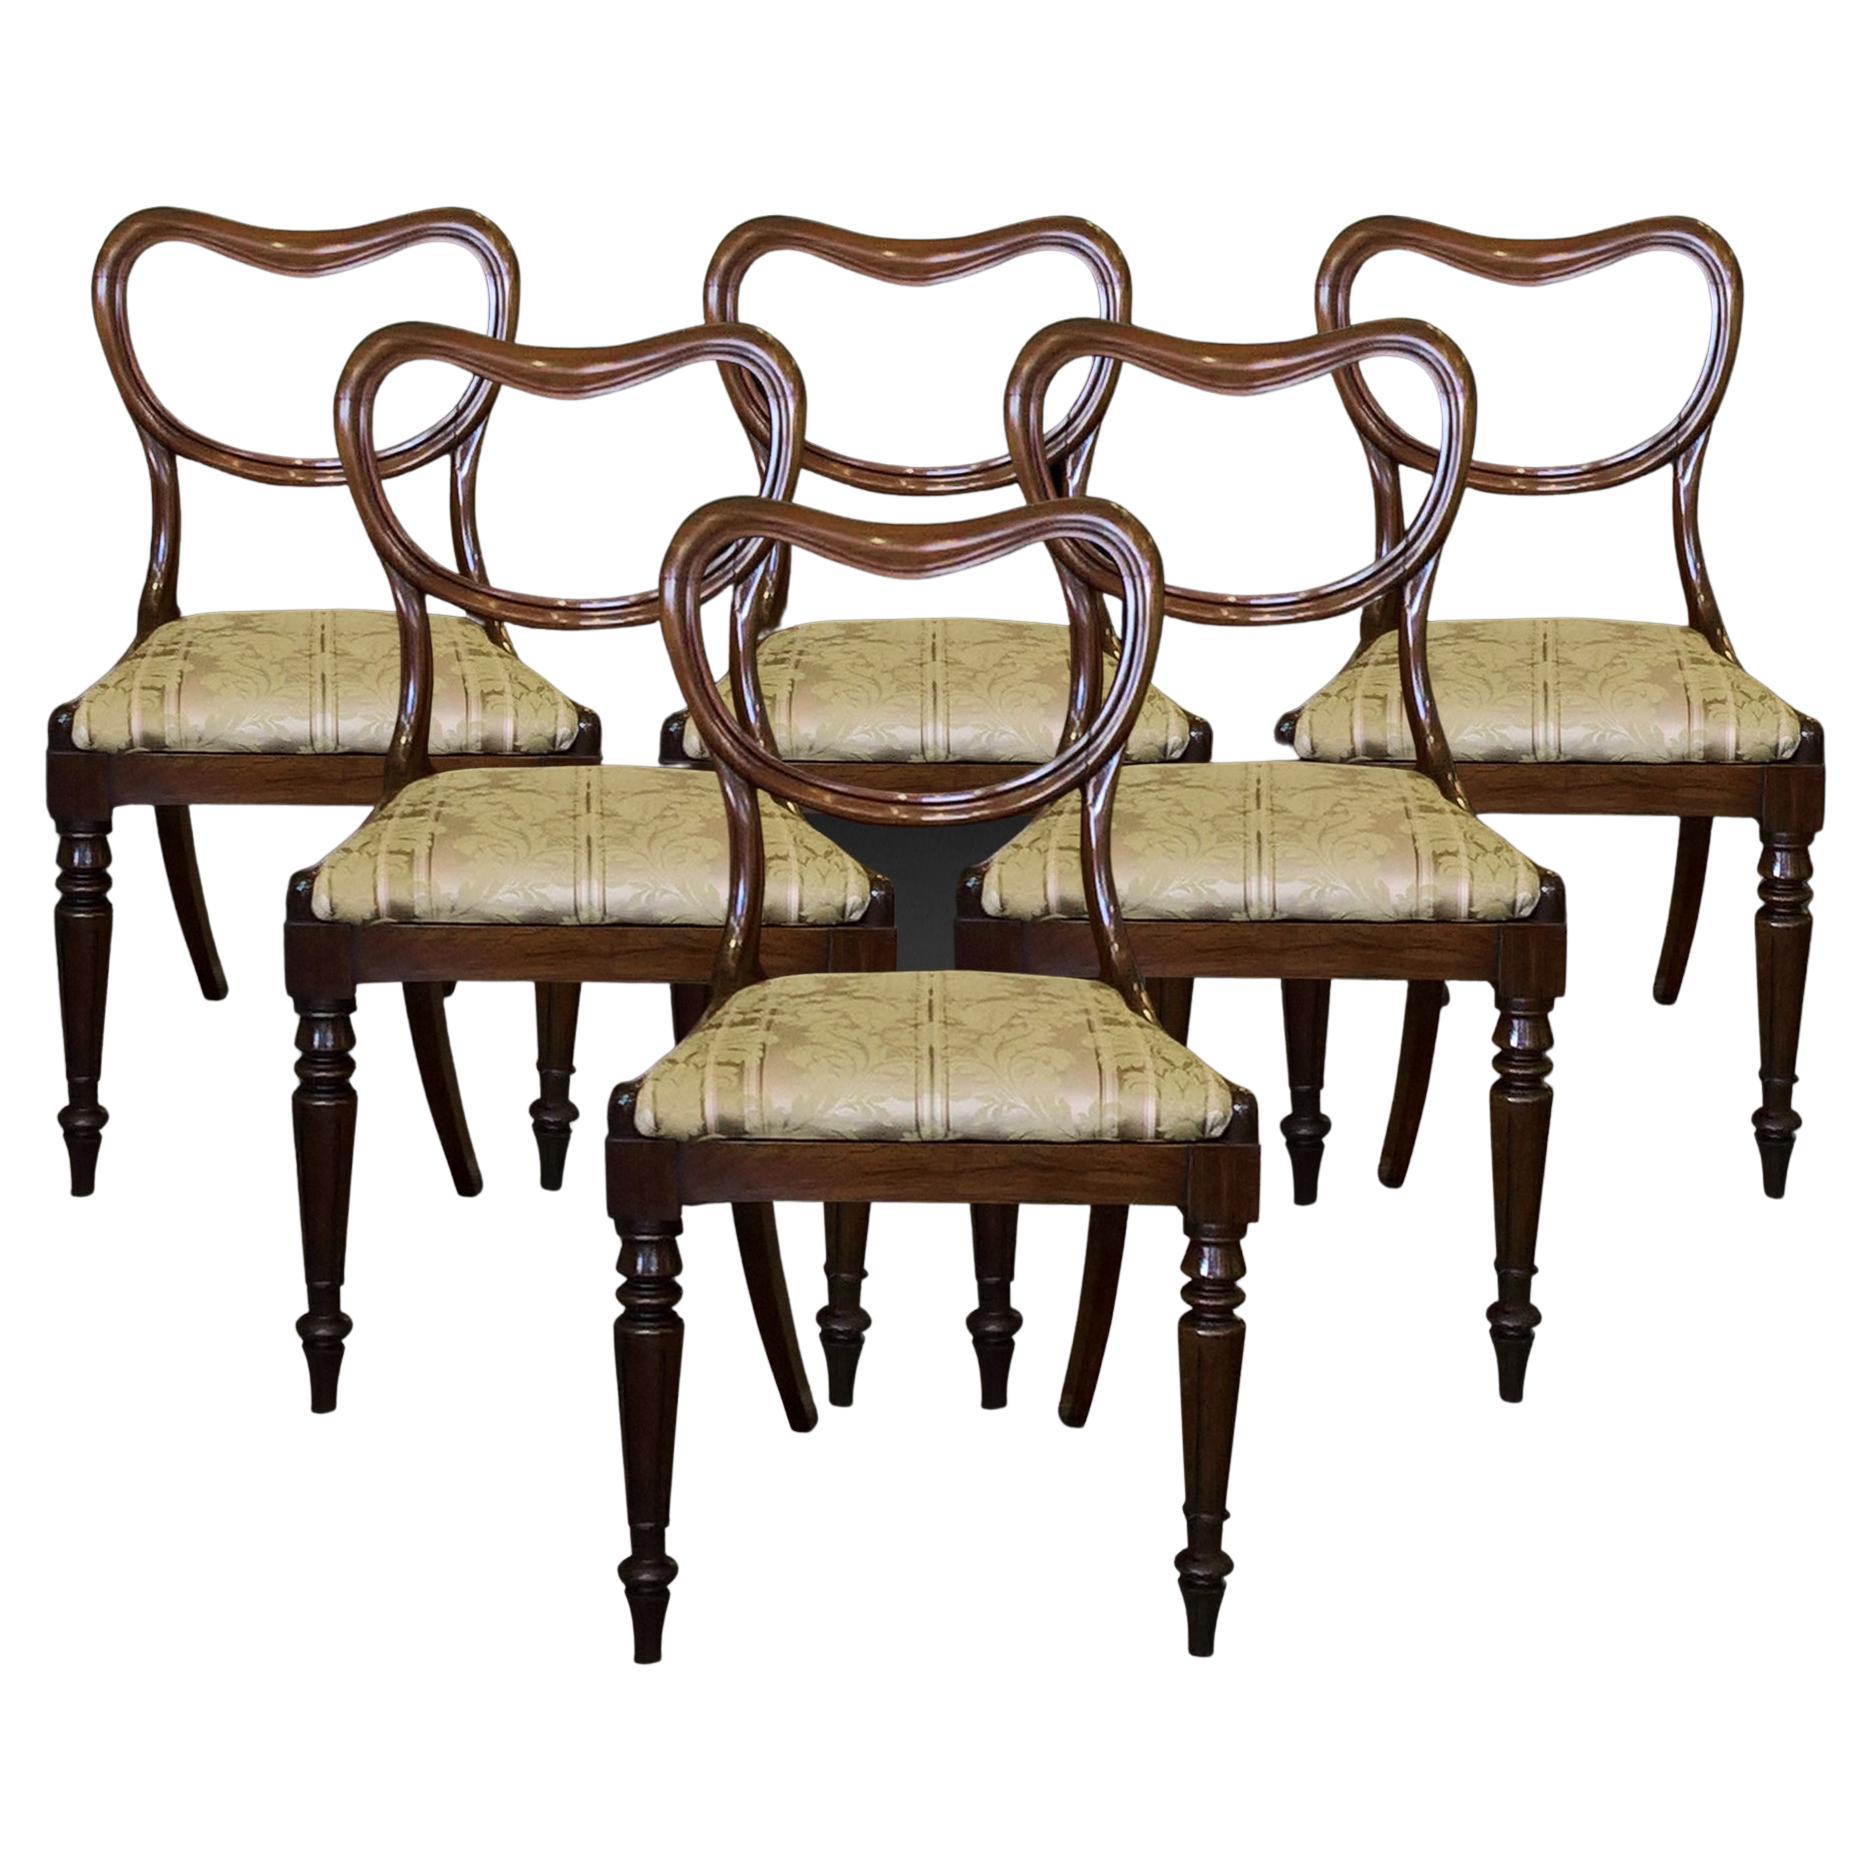 Set of Six Late Regency Rosewood Dining Chairs